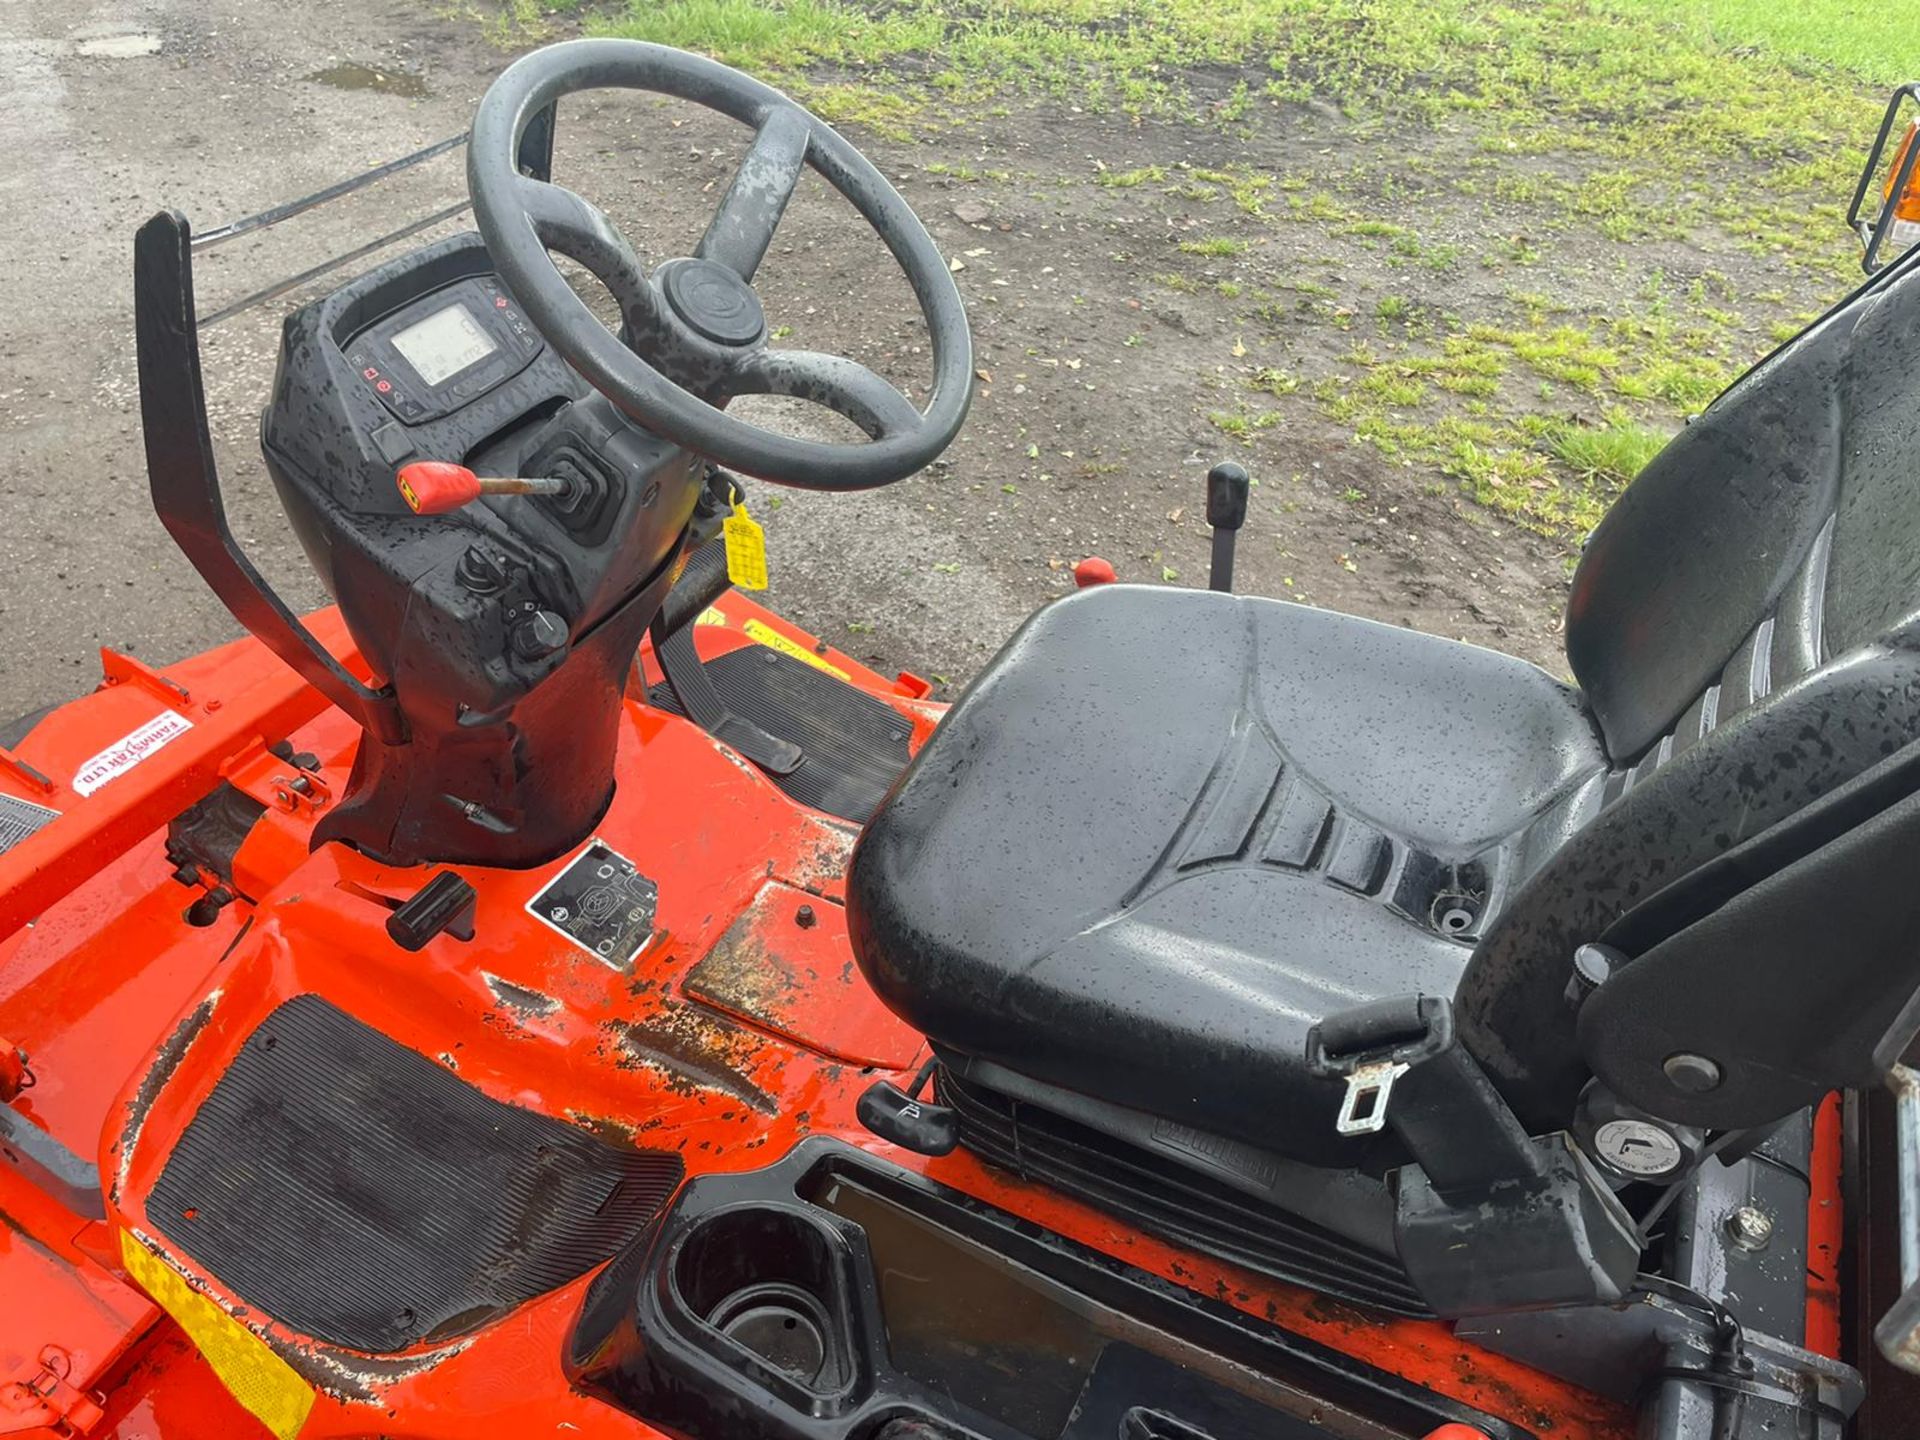 2014 KUBOTA F3890 RIDE ON MOWER, RUNS DRIVES AND CUTS, SHOWING A LOW 1772 HOURS *PLUS VAT* - Image 7 of 7